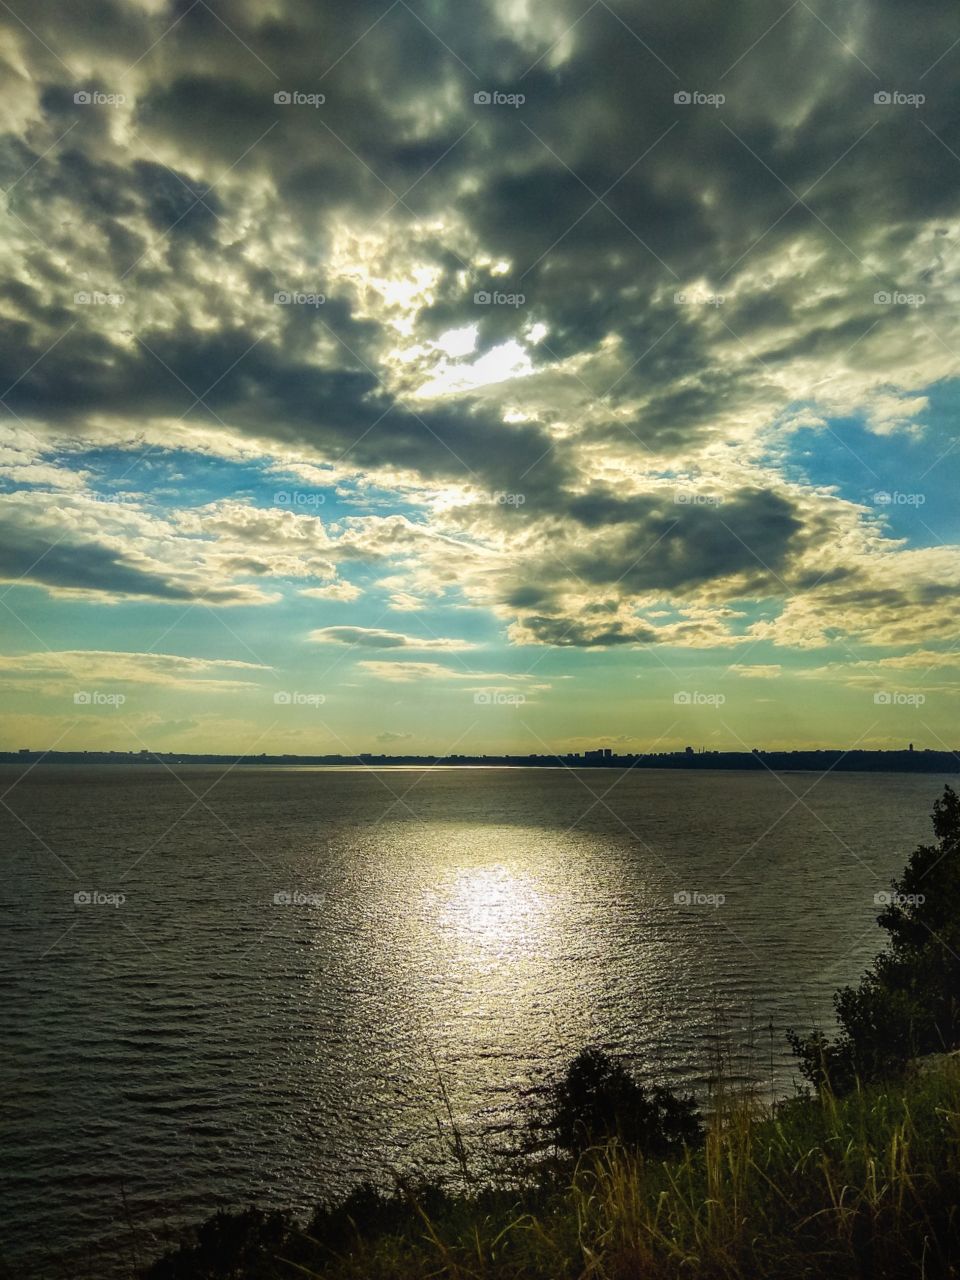 View of a very beautiful sky covered with clouds, through which the light of the sun breaks through, reflecting on the endless expanses of the Volga River (Russia), spread out under all this magnificence, on a cloudy autumn evening